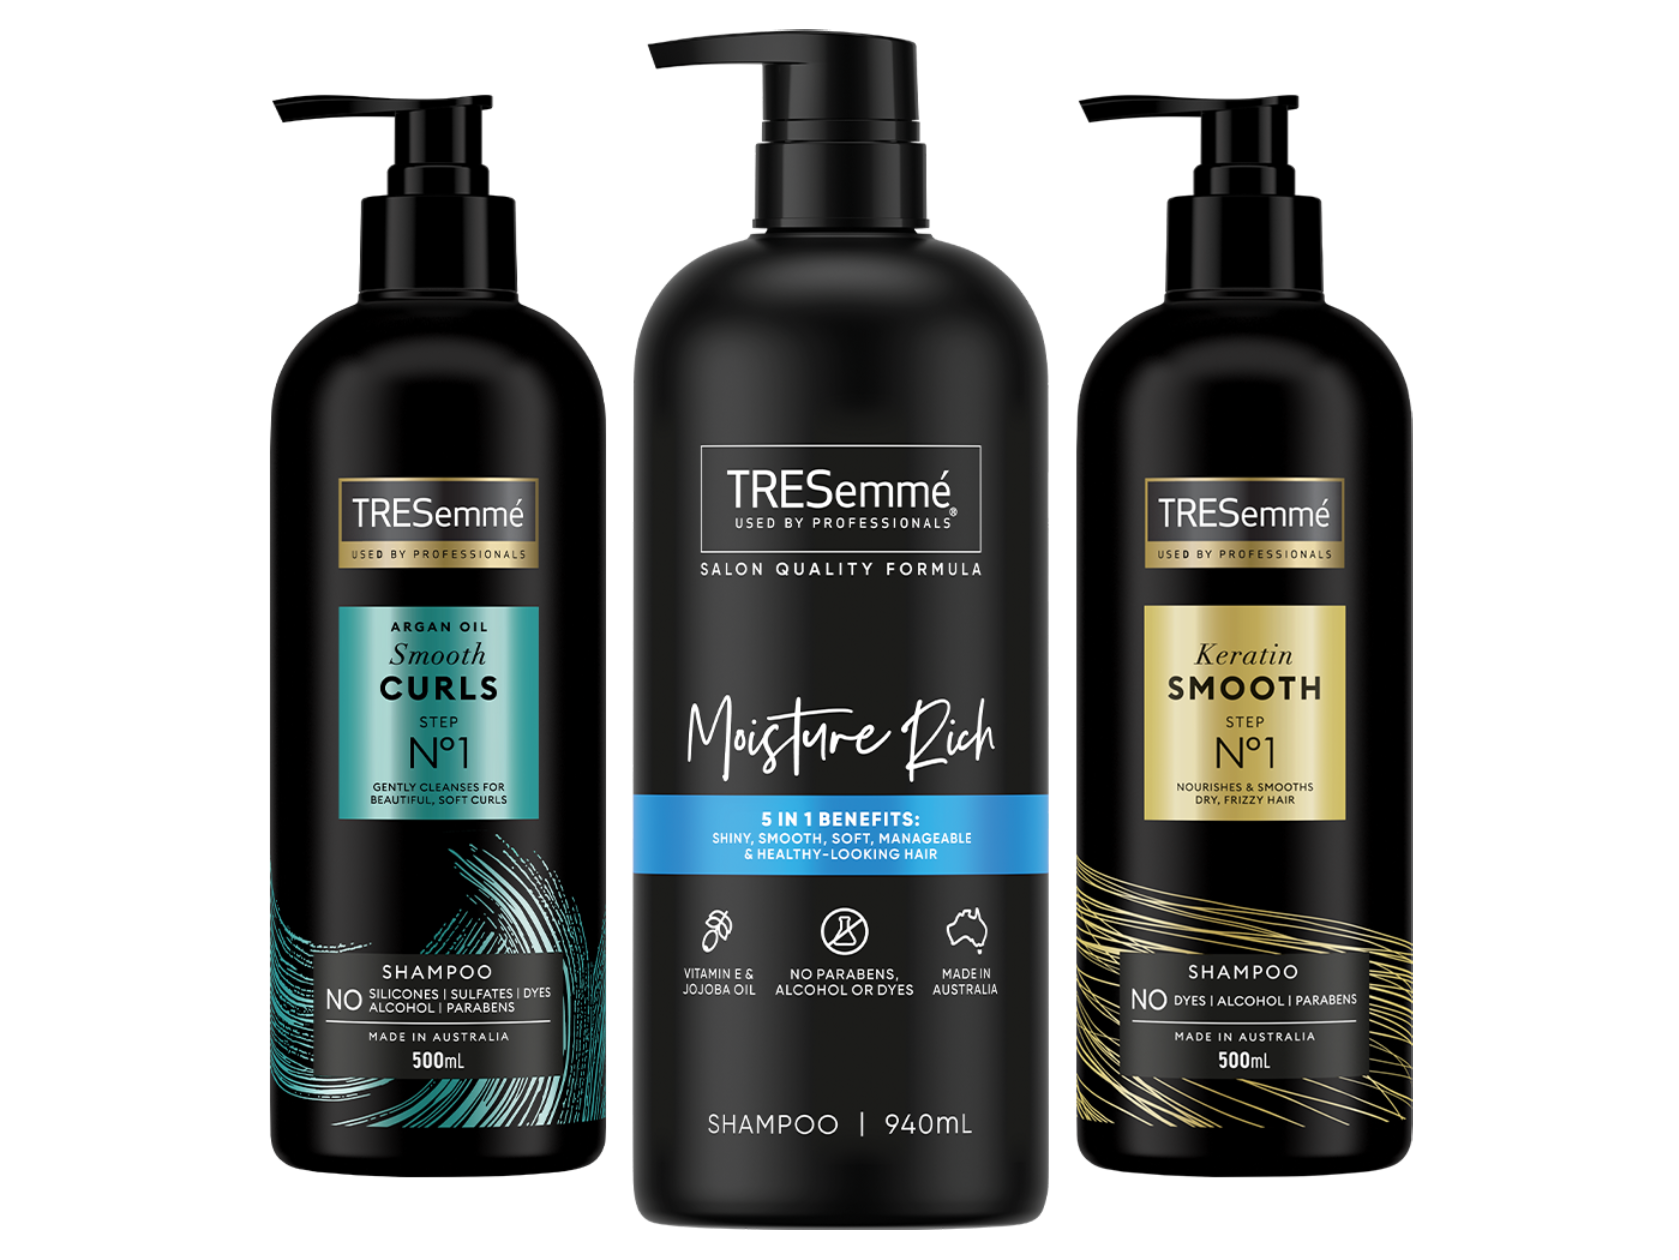 TRESemme's Shampoo Products